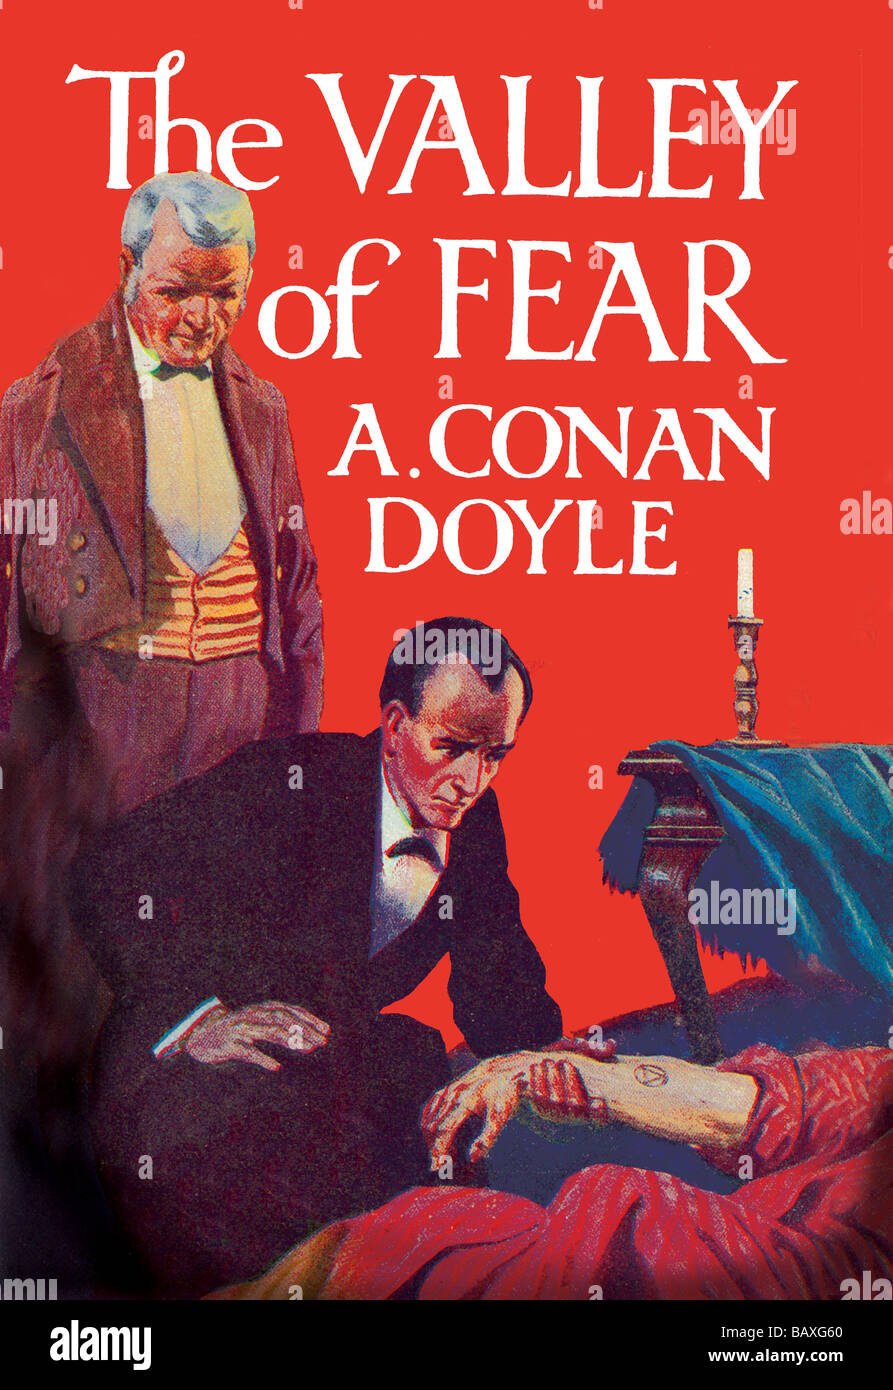 The Valley of Fear (book cover) Stock Photo